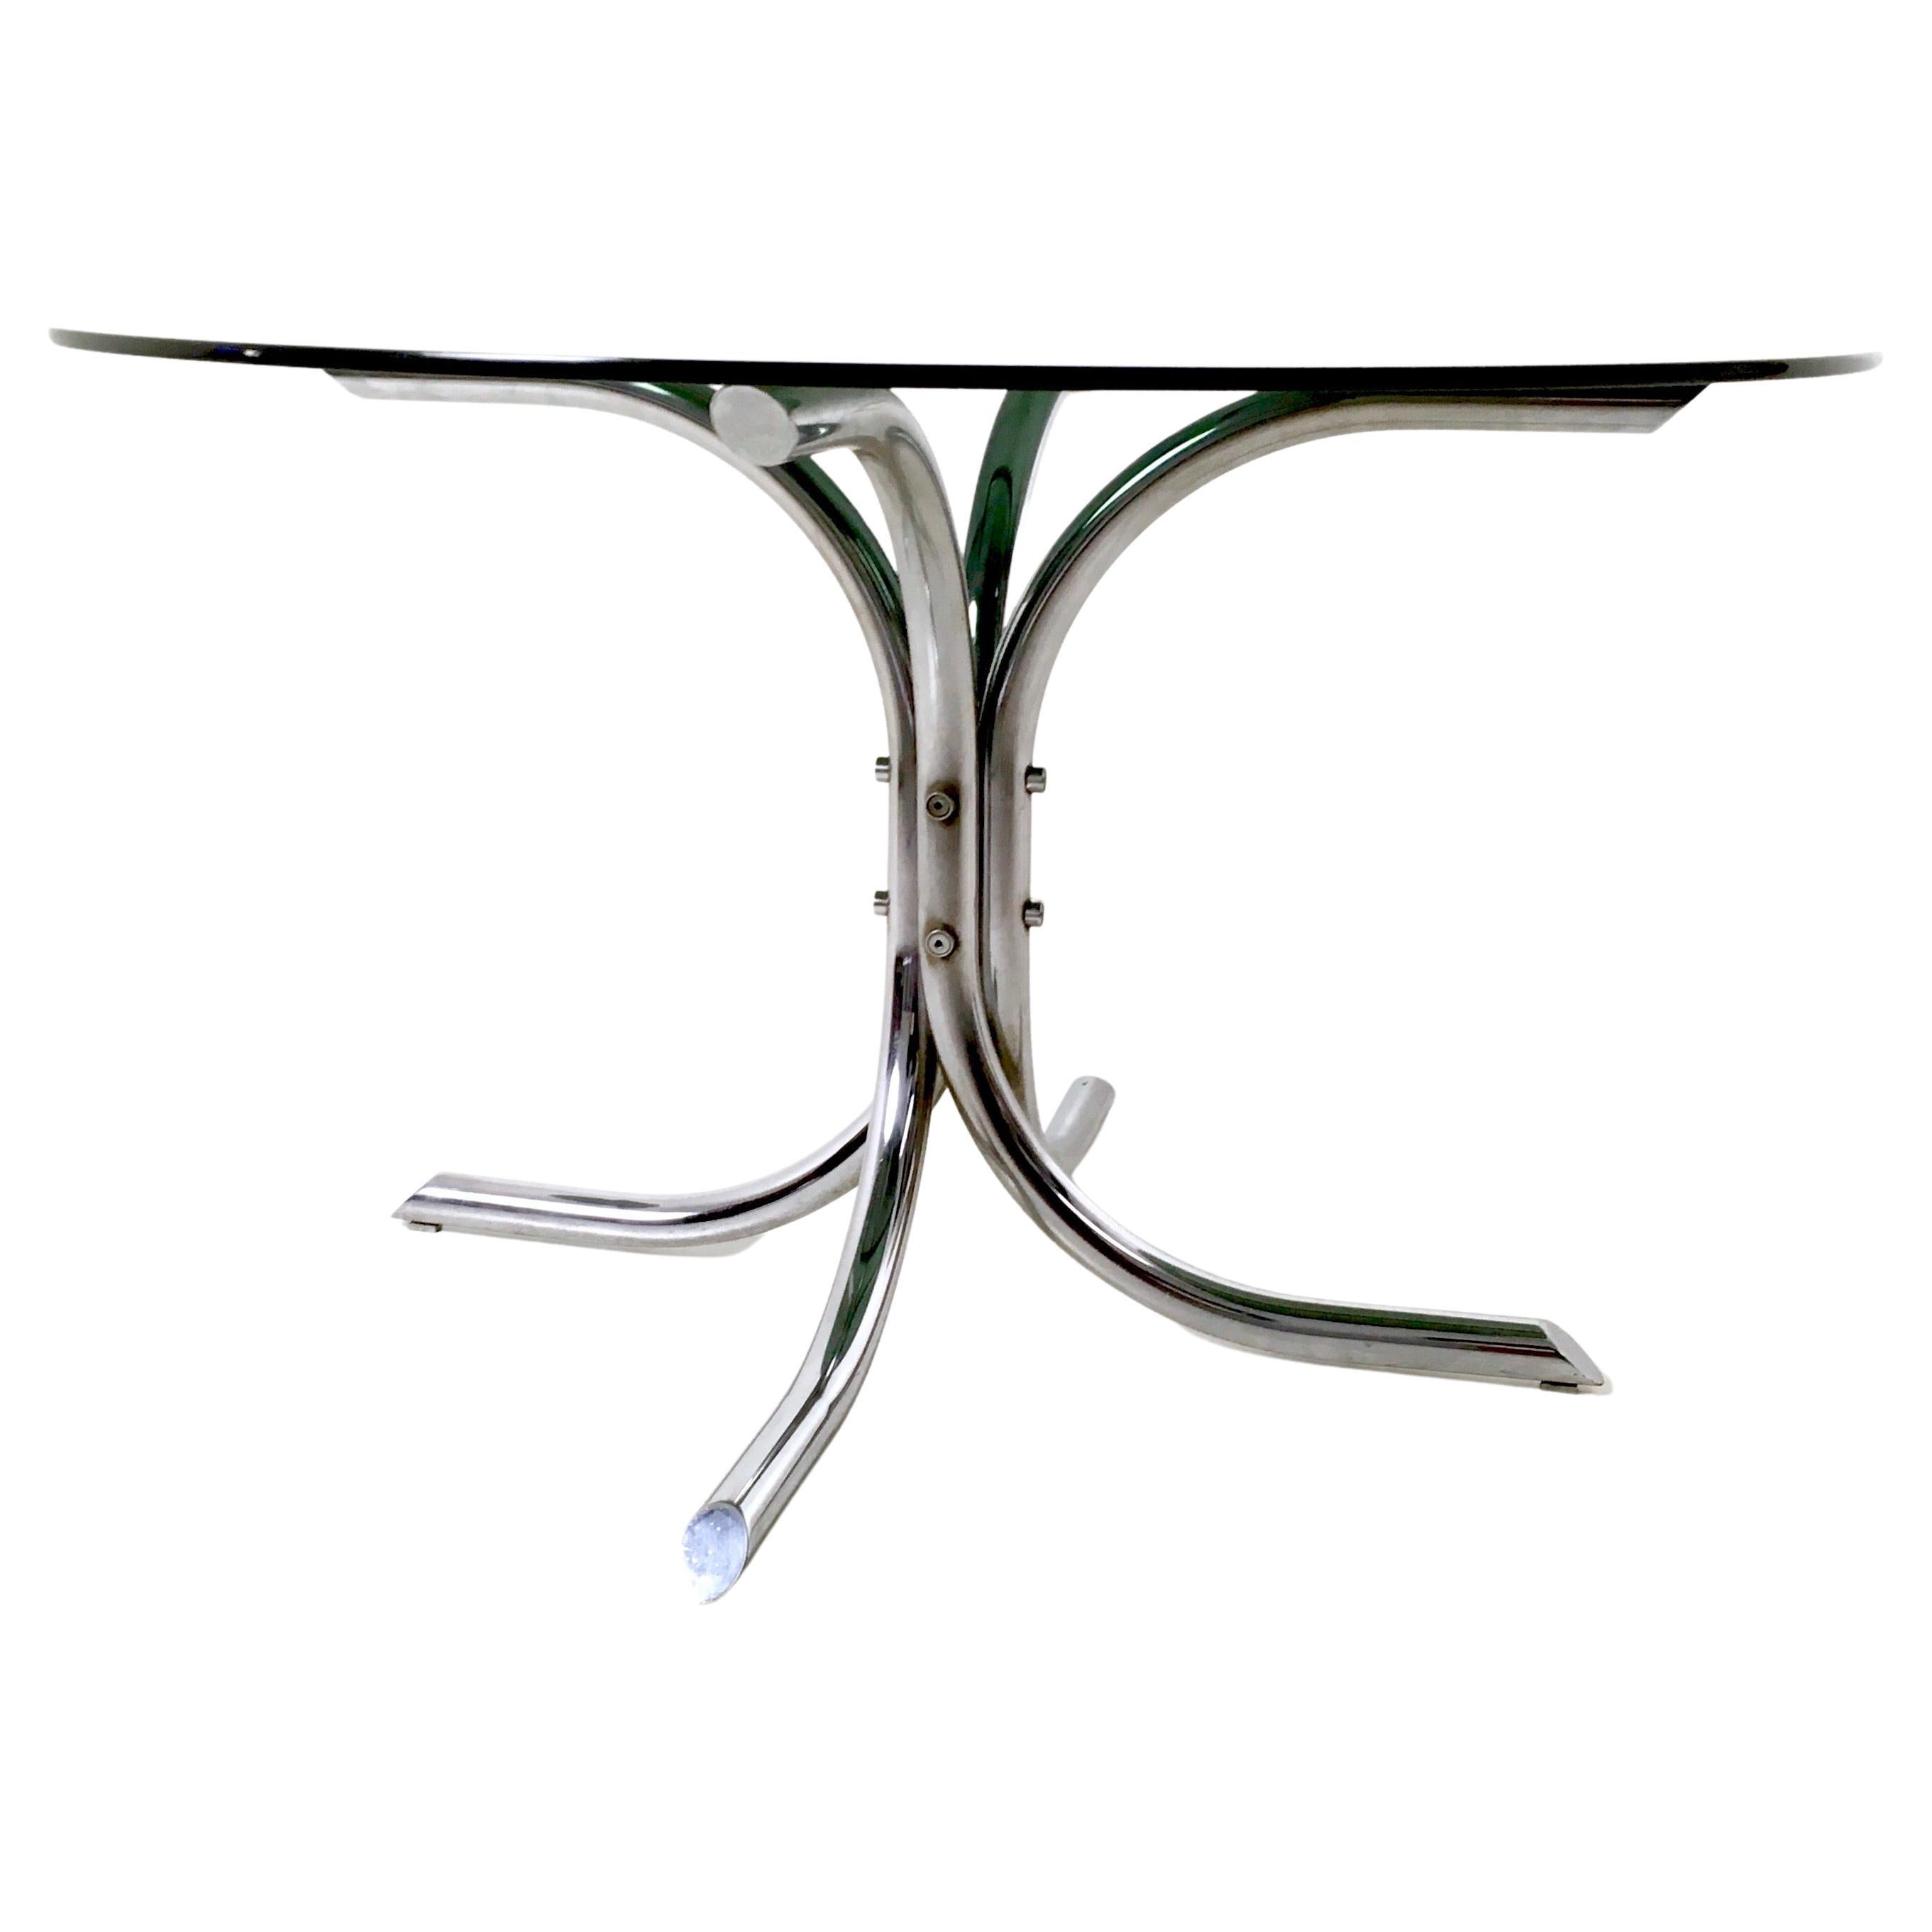 Italy, 1970s.
Designed by Studio Tetrarch and Produced by Bazzani.
This table features a round smoked glass top and a chrome-plated metal pedestal. 
It is a vintage piece, therefore it might show slight traces of use, but it can be considered as in